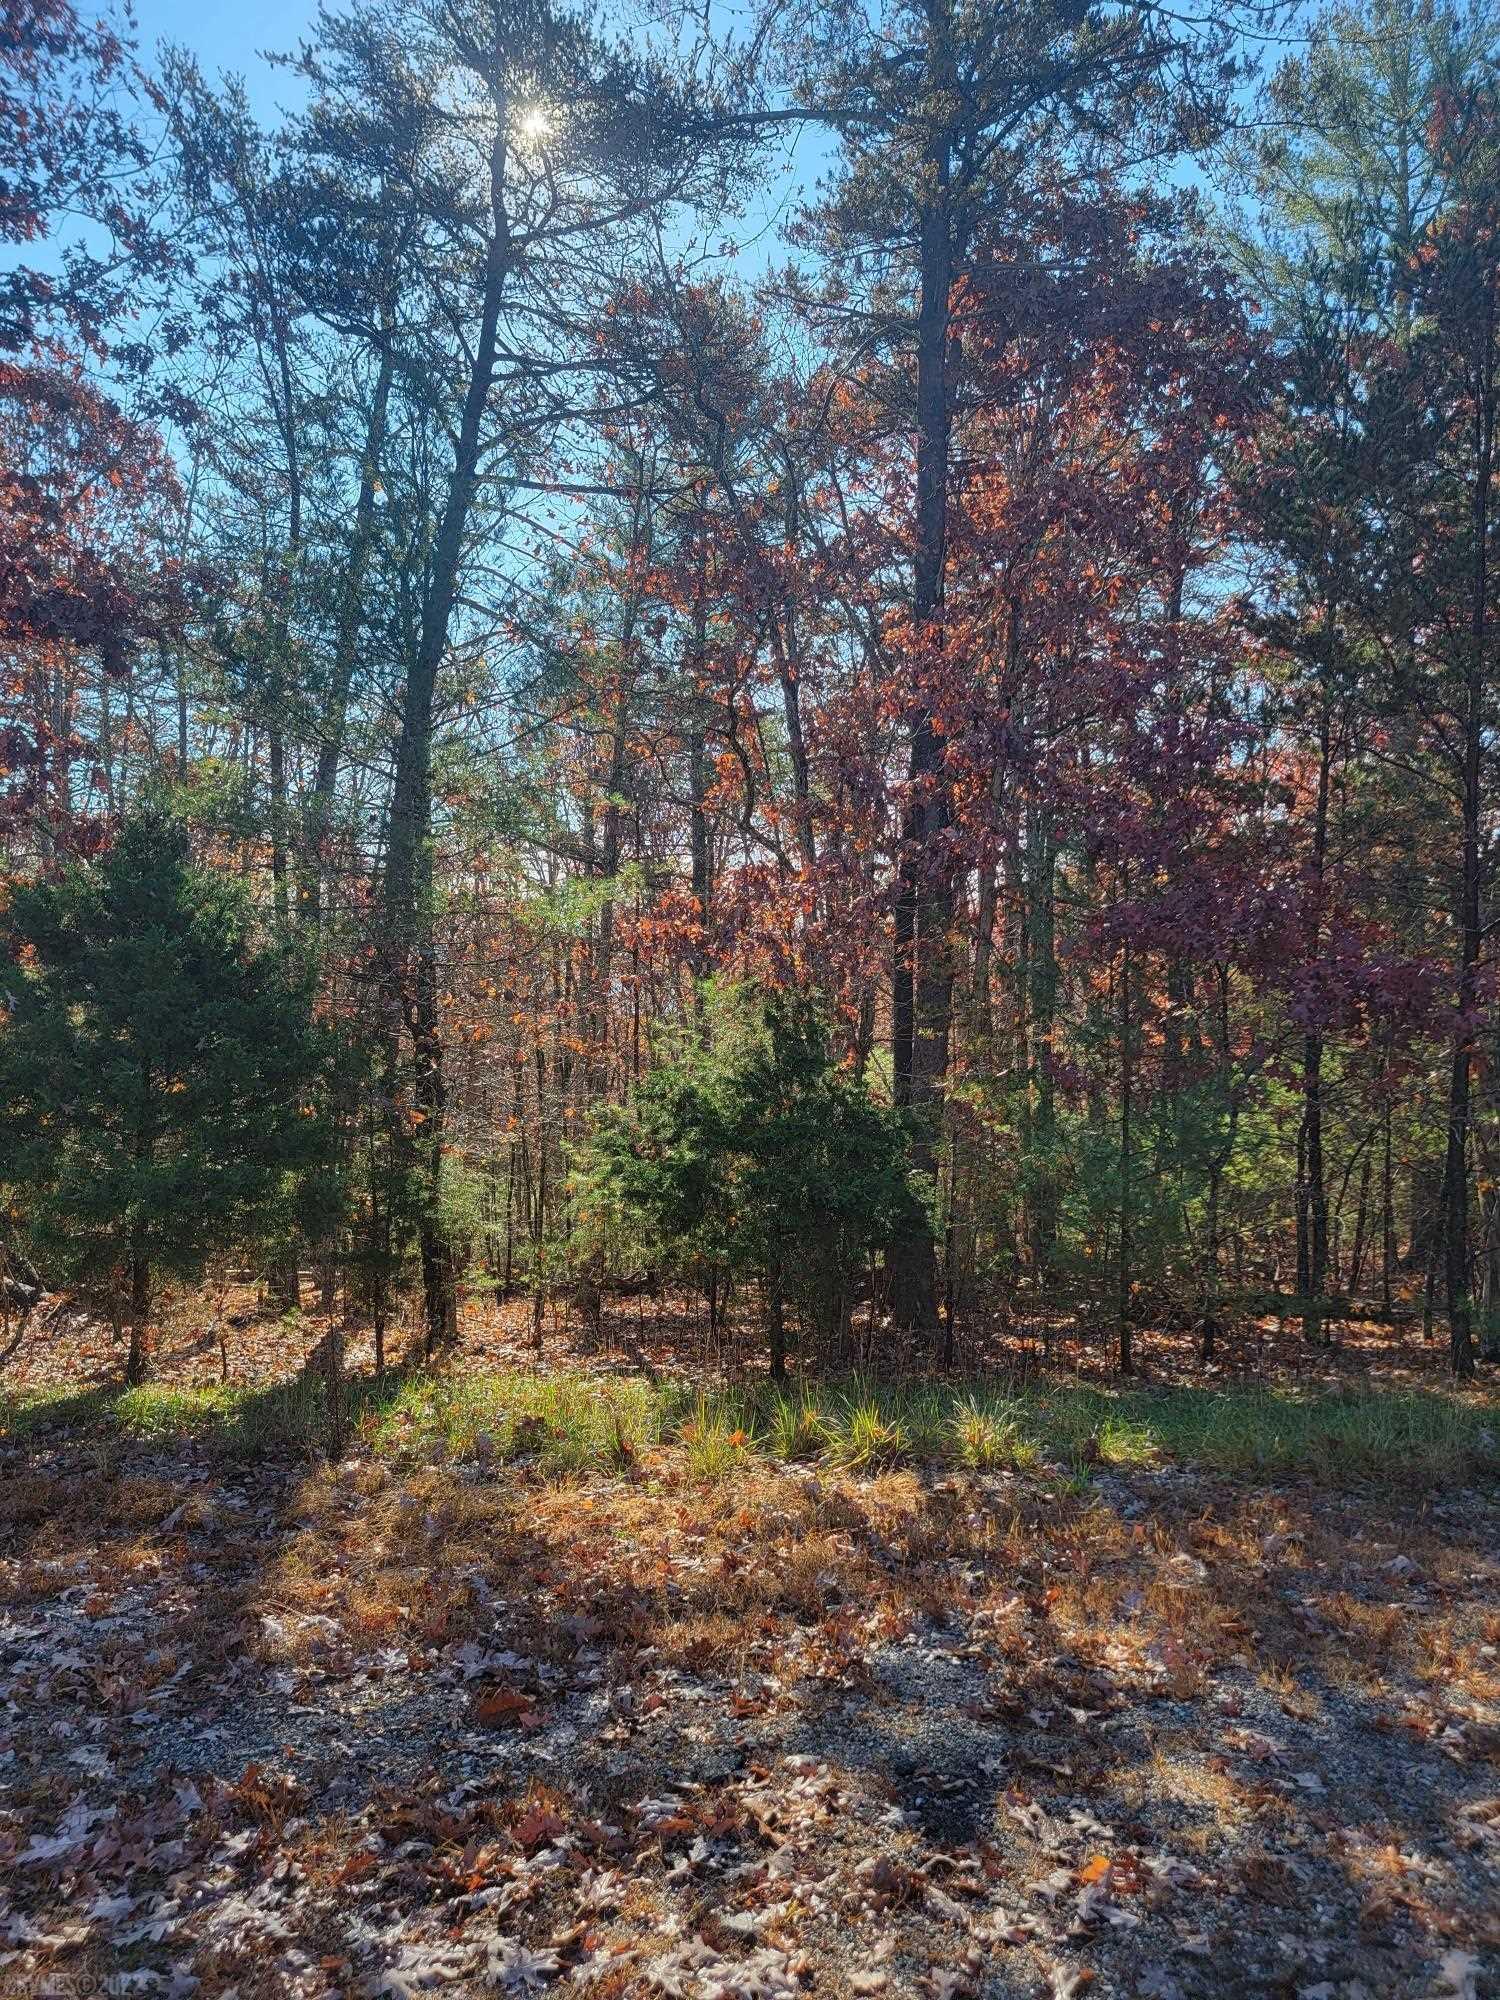 Worthy of your dream home, offering a peaceful retreat! This 5.481 acre lot is in an ideal location for a commute to Blacksburg or Roanoke.